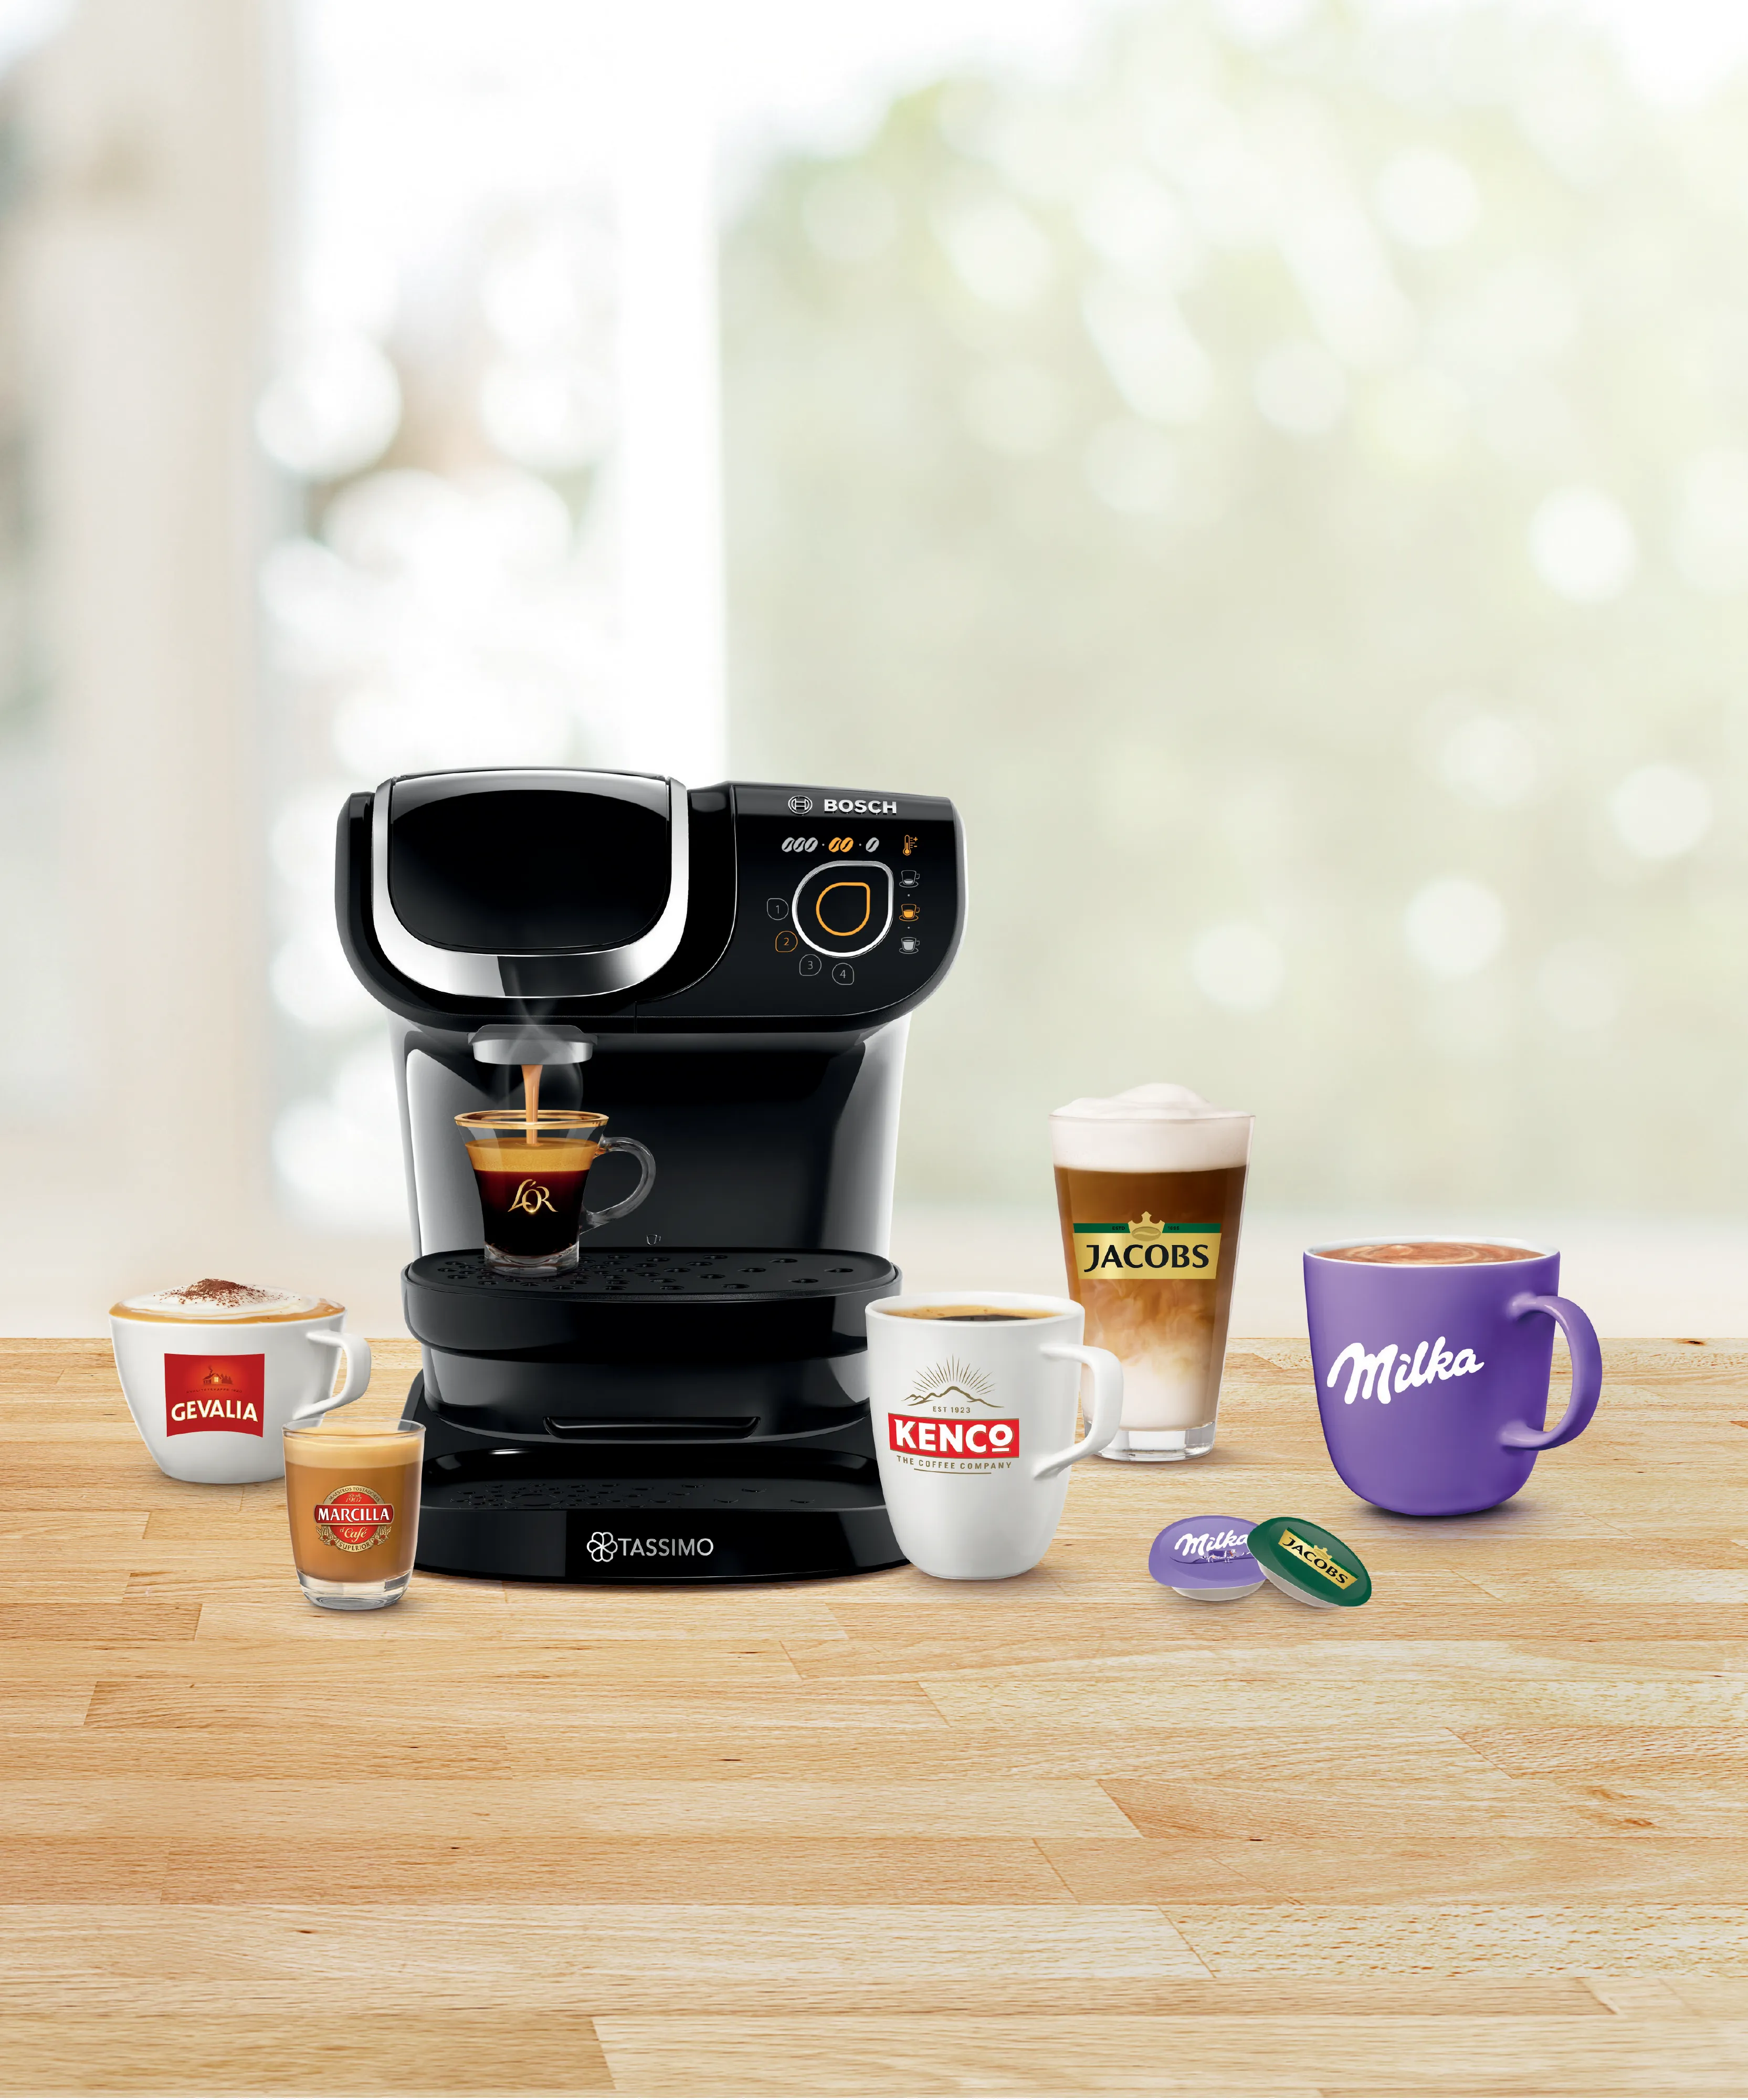 HOW TO MAKE THE New Cadbury Milk Chocolate Drink with the BOSCH TASSIMO  MACHINE SYSTEM 